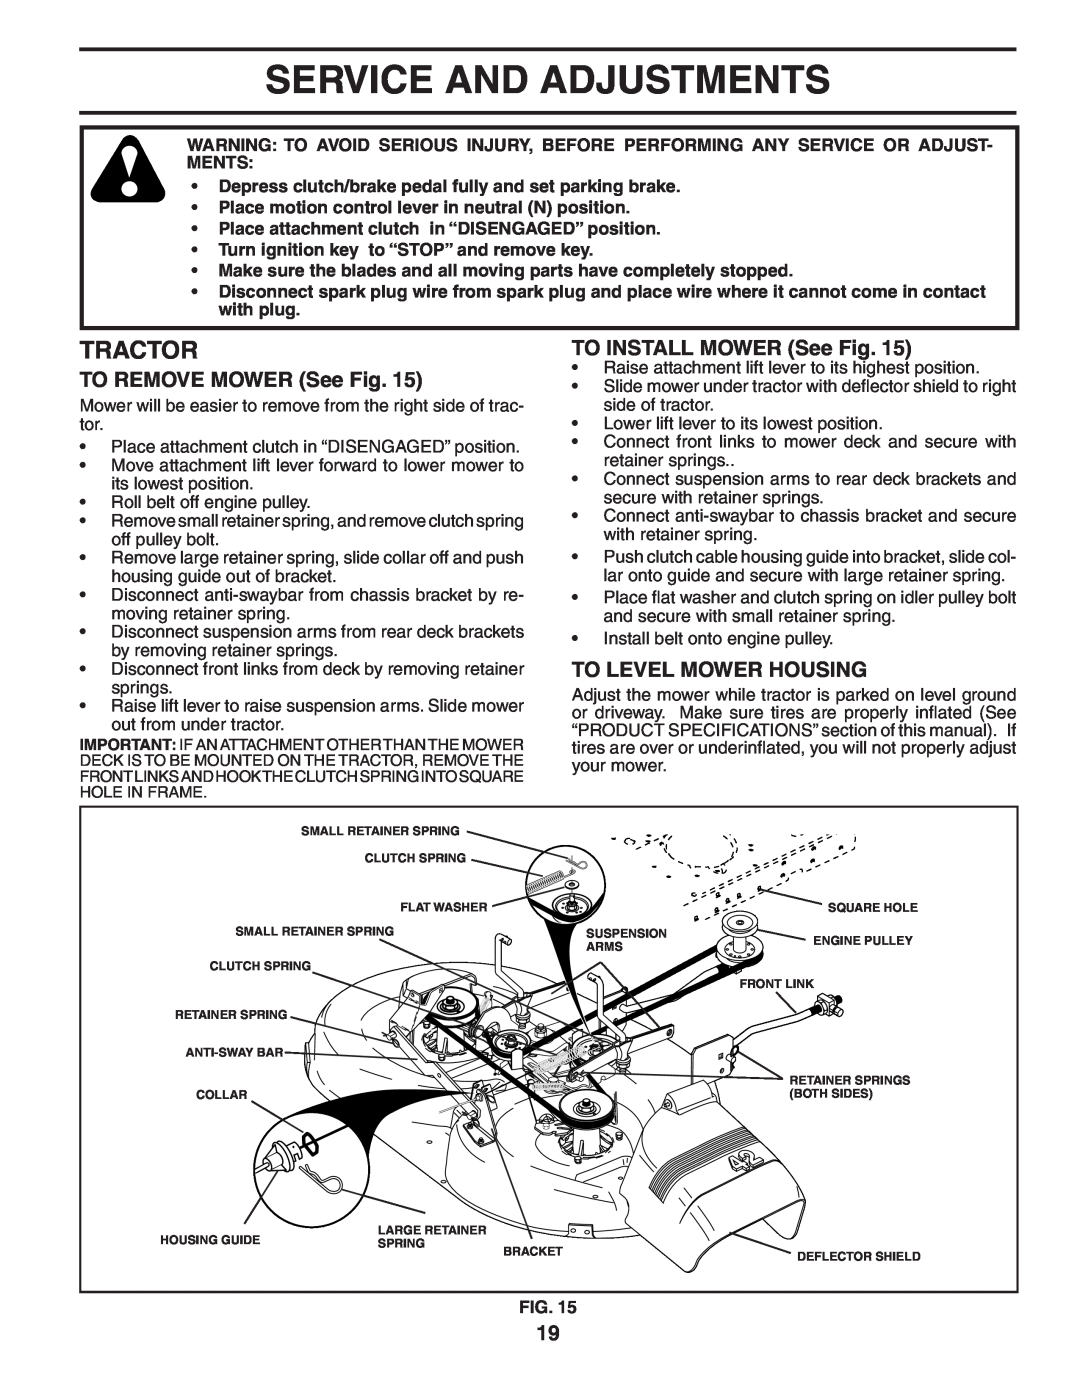 Poulan PB185H42LT manual Service And Adjustments, TO REMOVE MOWER See Fig, TO INSTALL MOWER See Fig, To Level Mower Housing 